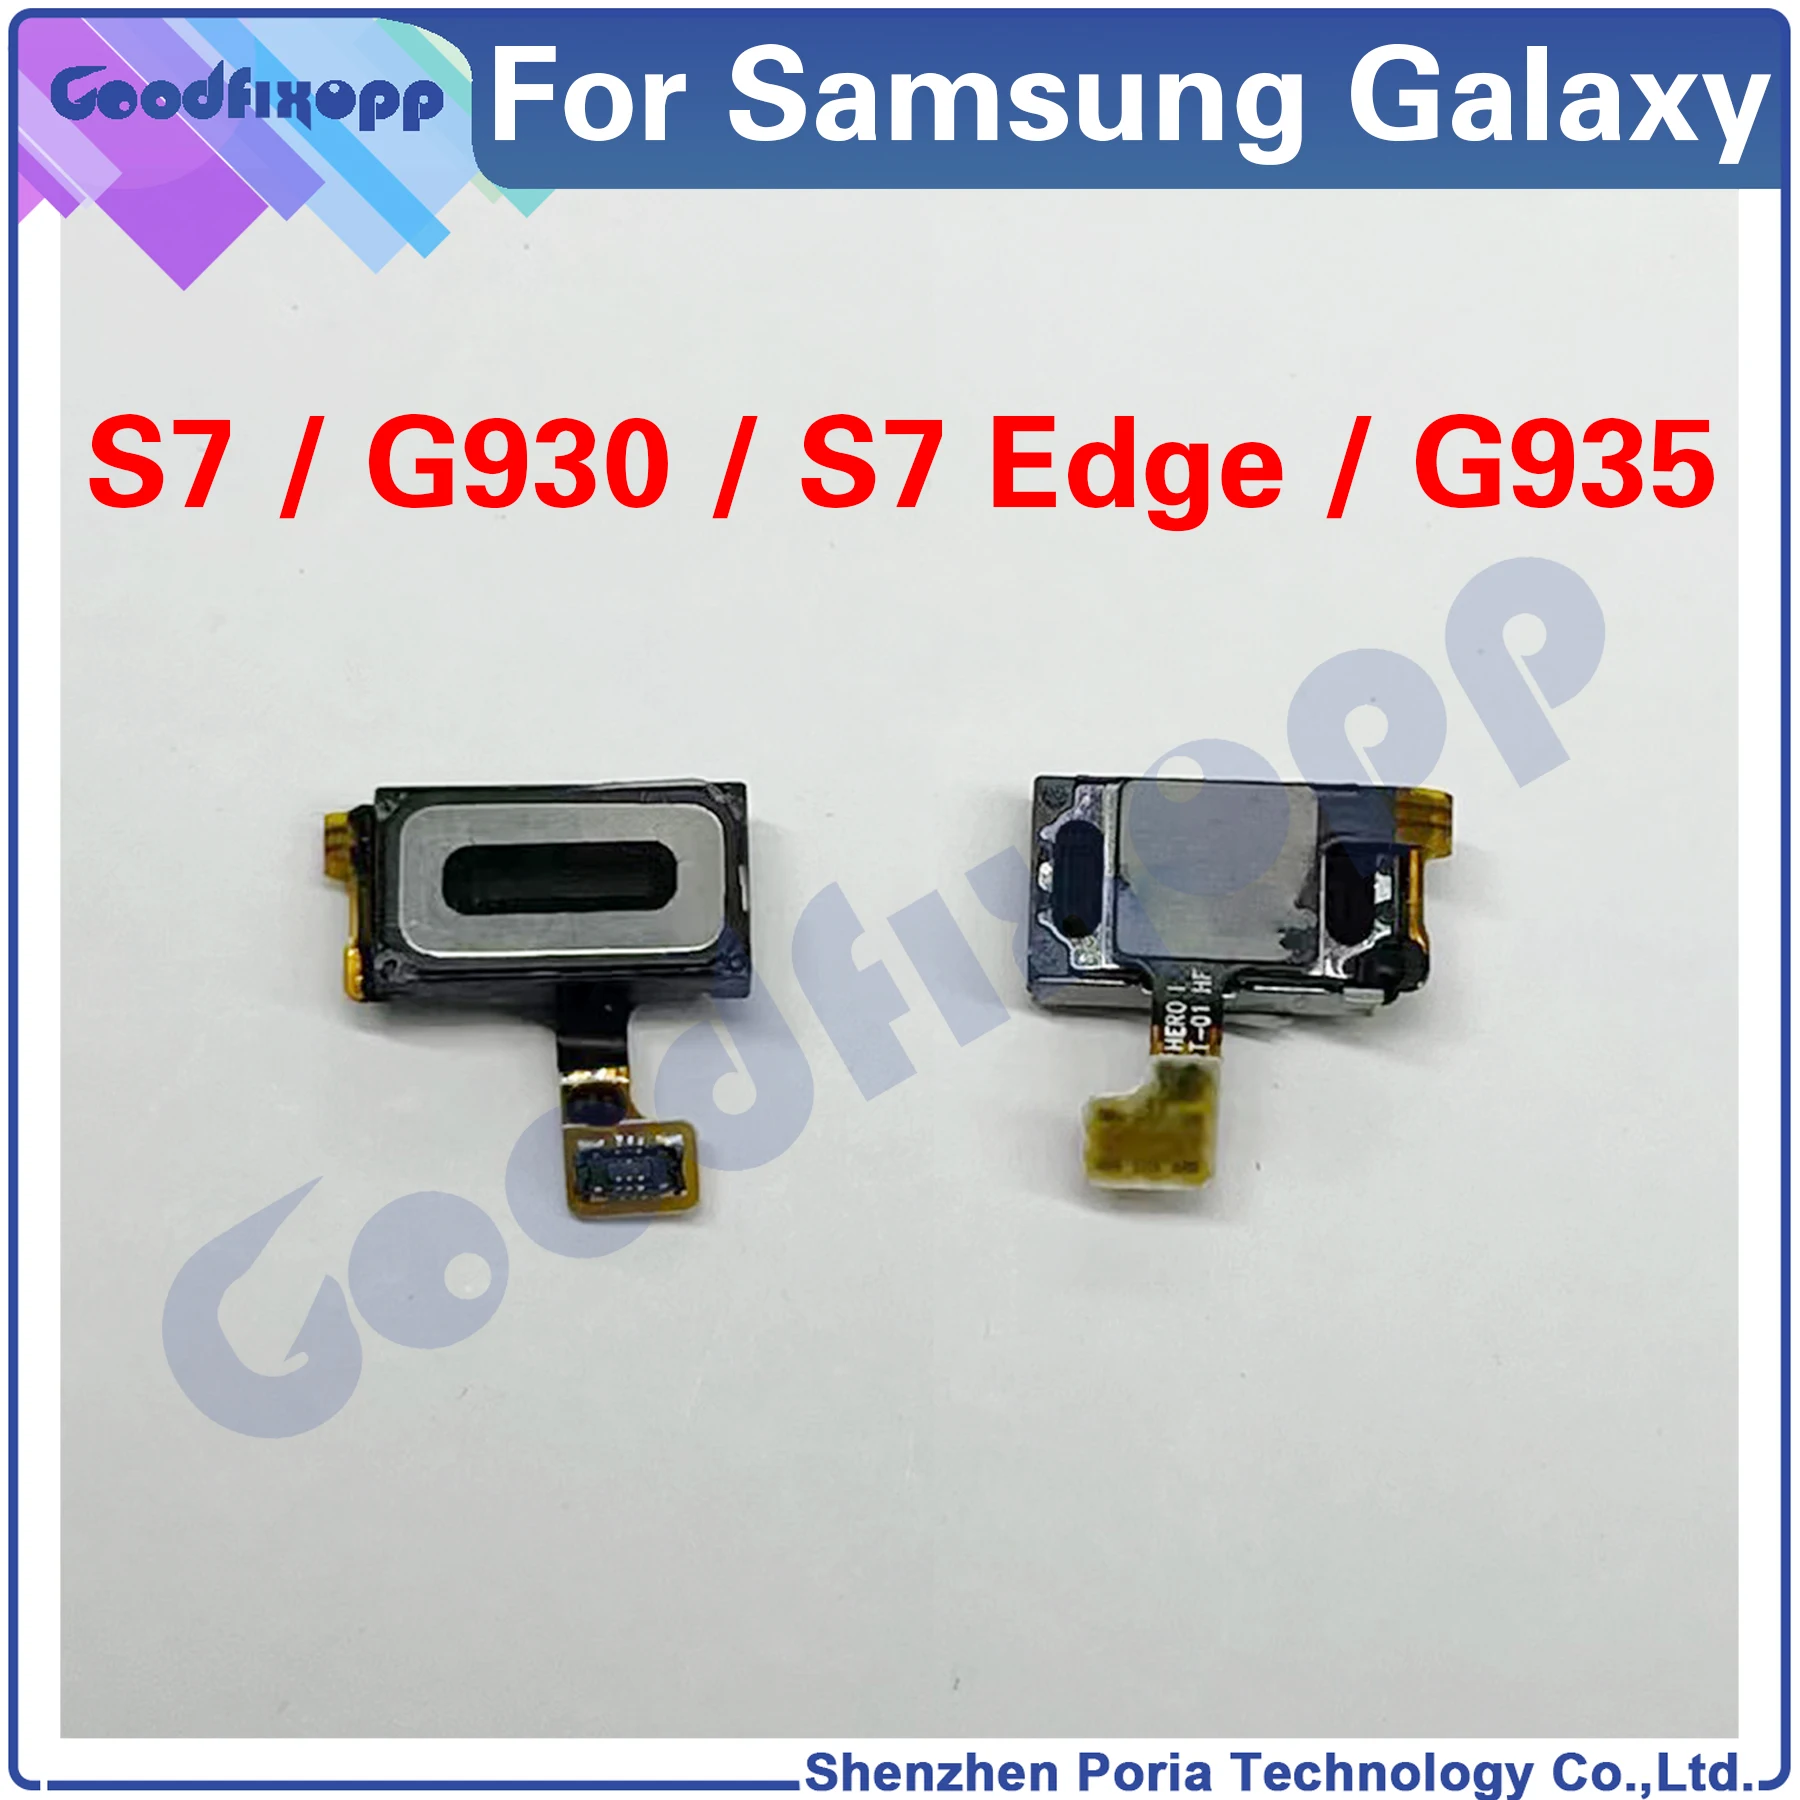 

For Samsung Galaxy S7 Edge SM-G930 SM-G935 G930 G935 G930F G9300 G930A G935F G9350 Audio Earphone Jack Flex Cable Replacement